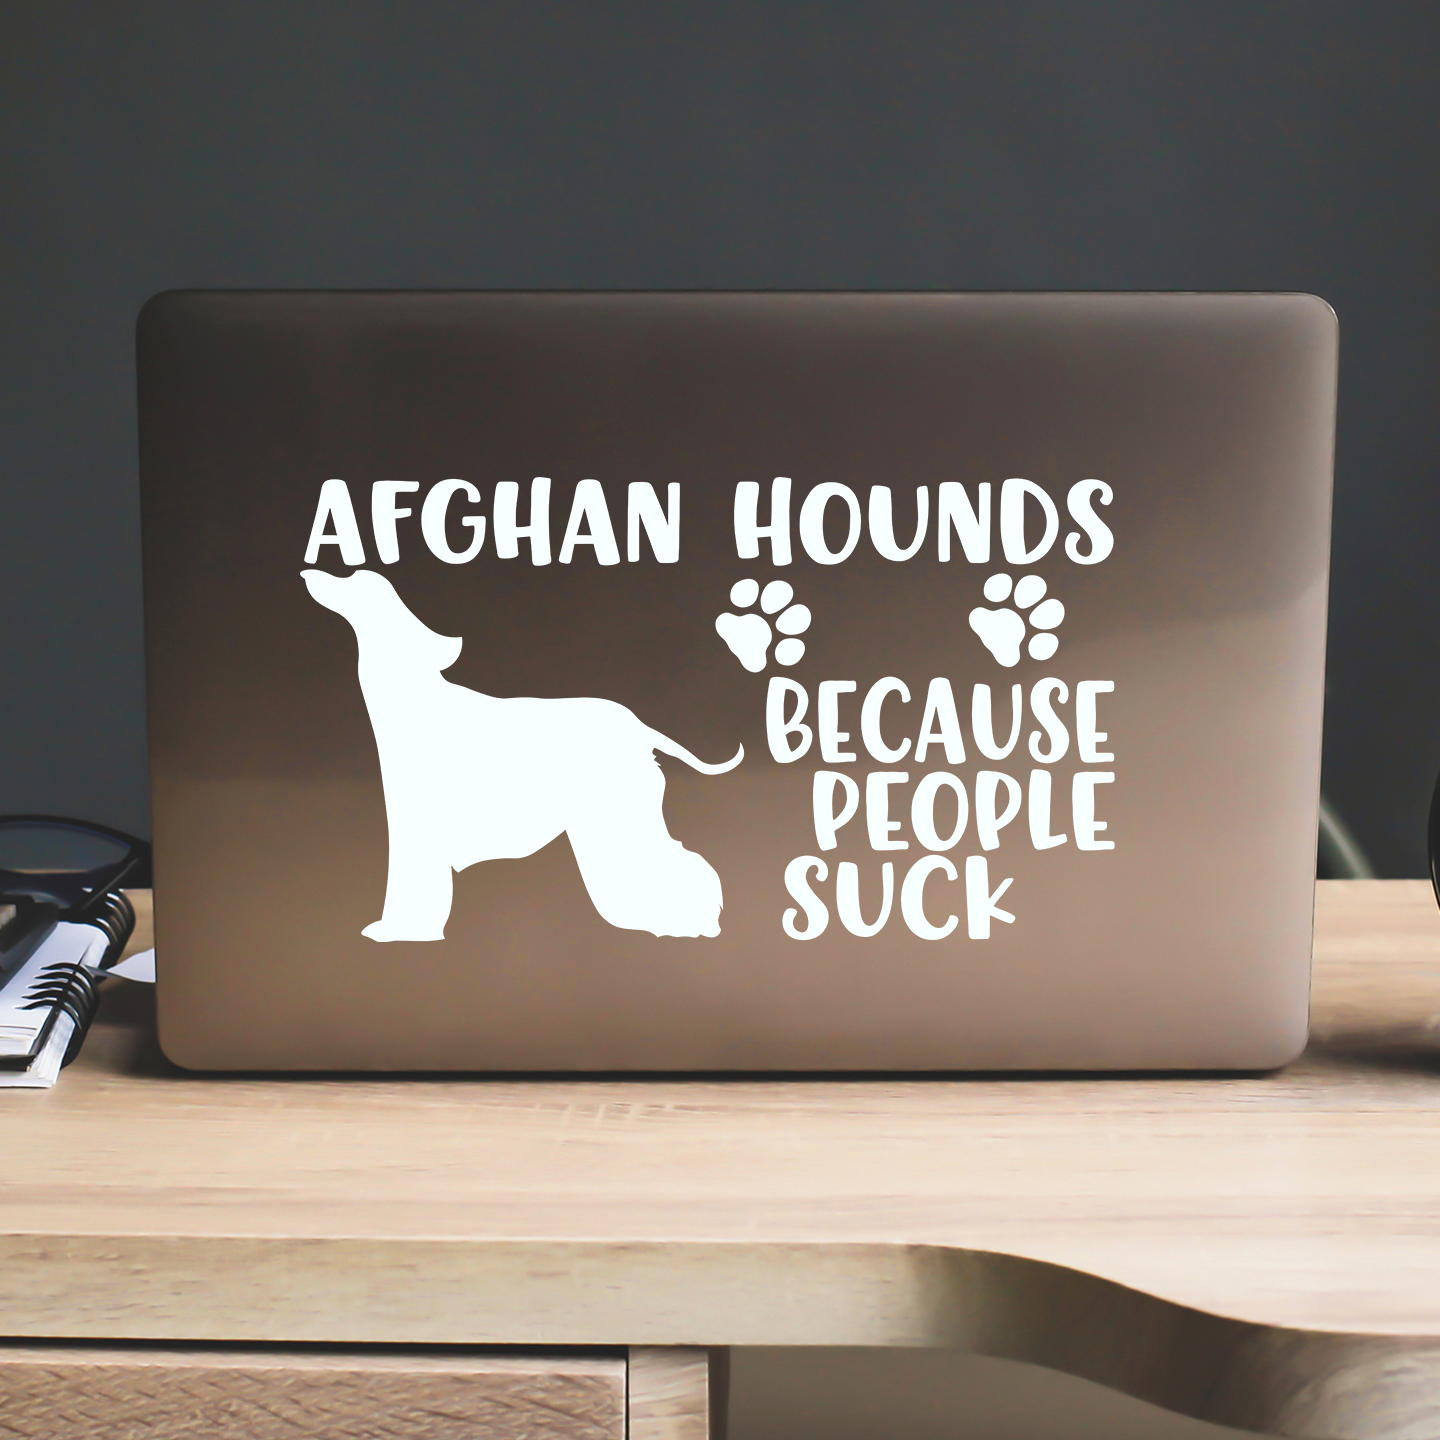 Afghan Hounds Because People Suck Sticker